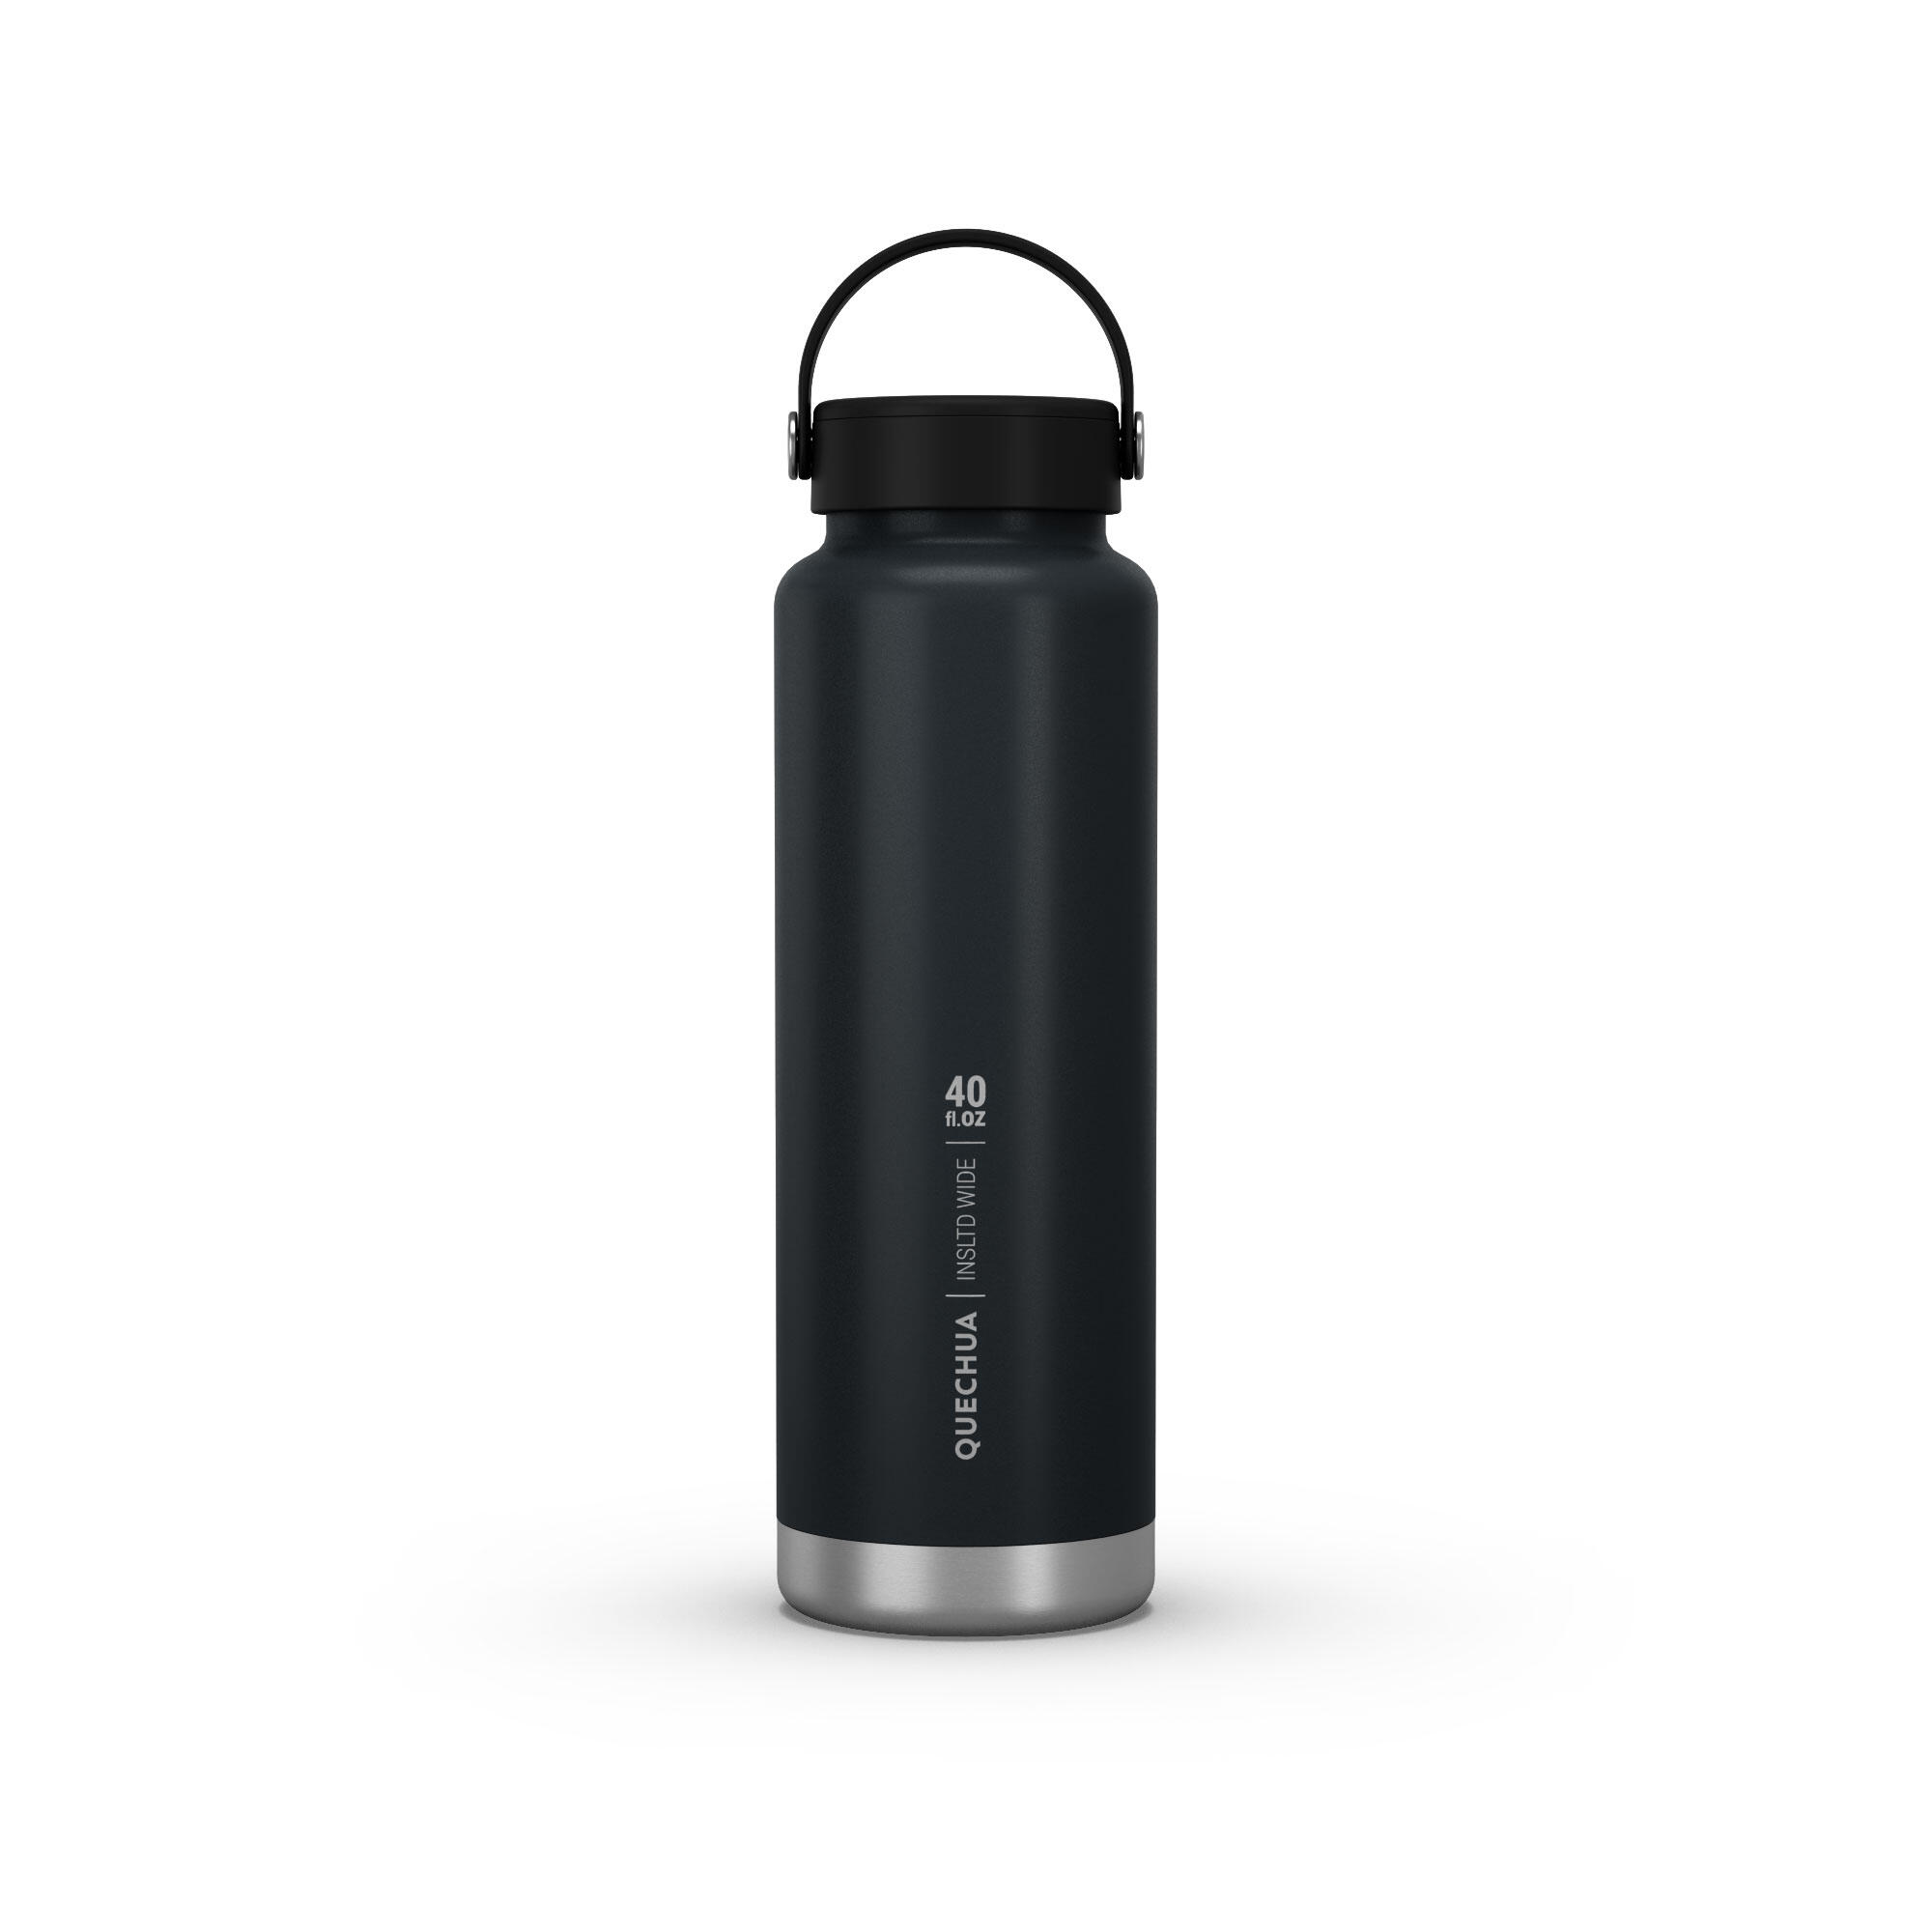 Thermal MH100 bottle (stainless steel, double vacuum wall) 1.2L wide neck, black 10/10